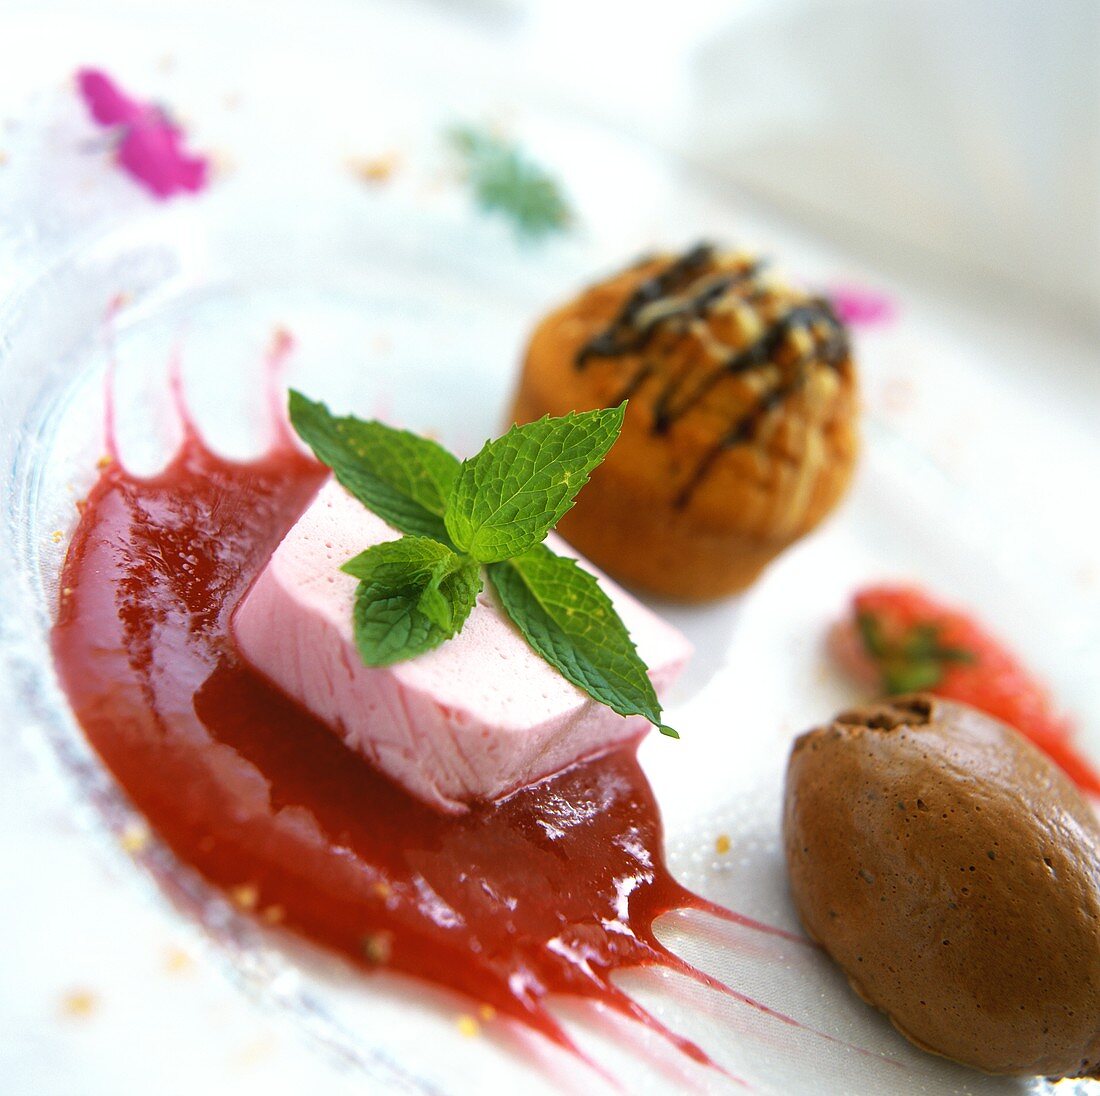 Dessert plates: chocolate mousse, strawberry ice in sauce etc.